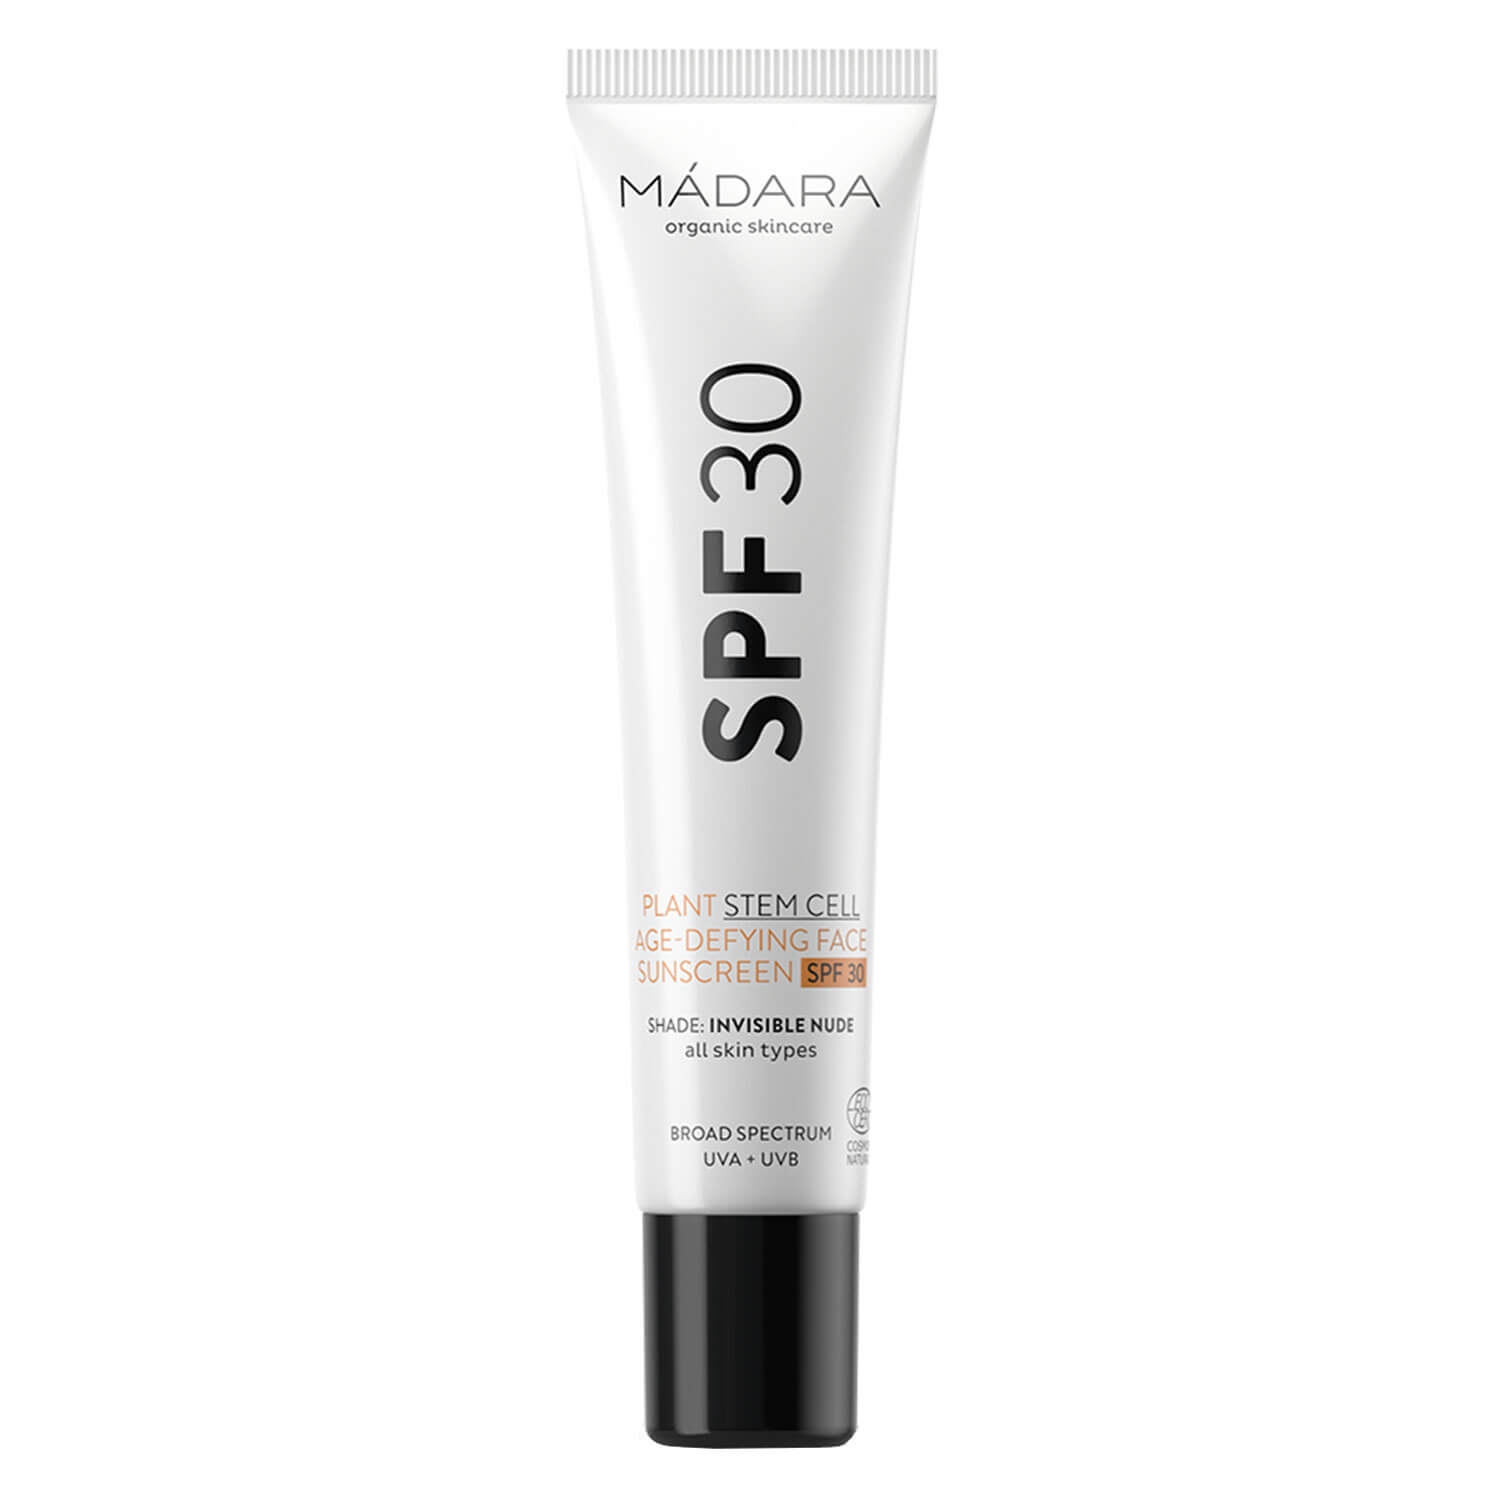 Product image from MÁDARA Care - Plant Stem Cell Age-Defying Face Sunscreen SPF30